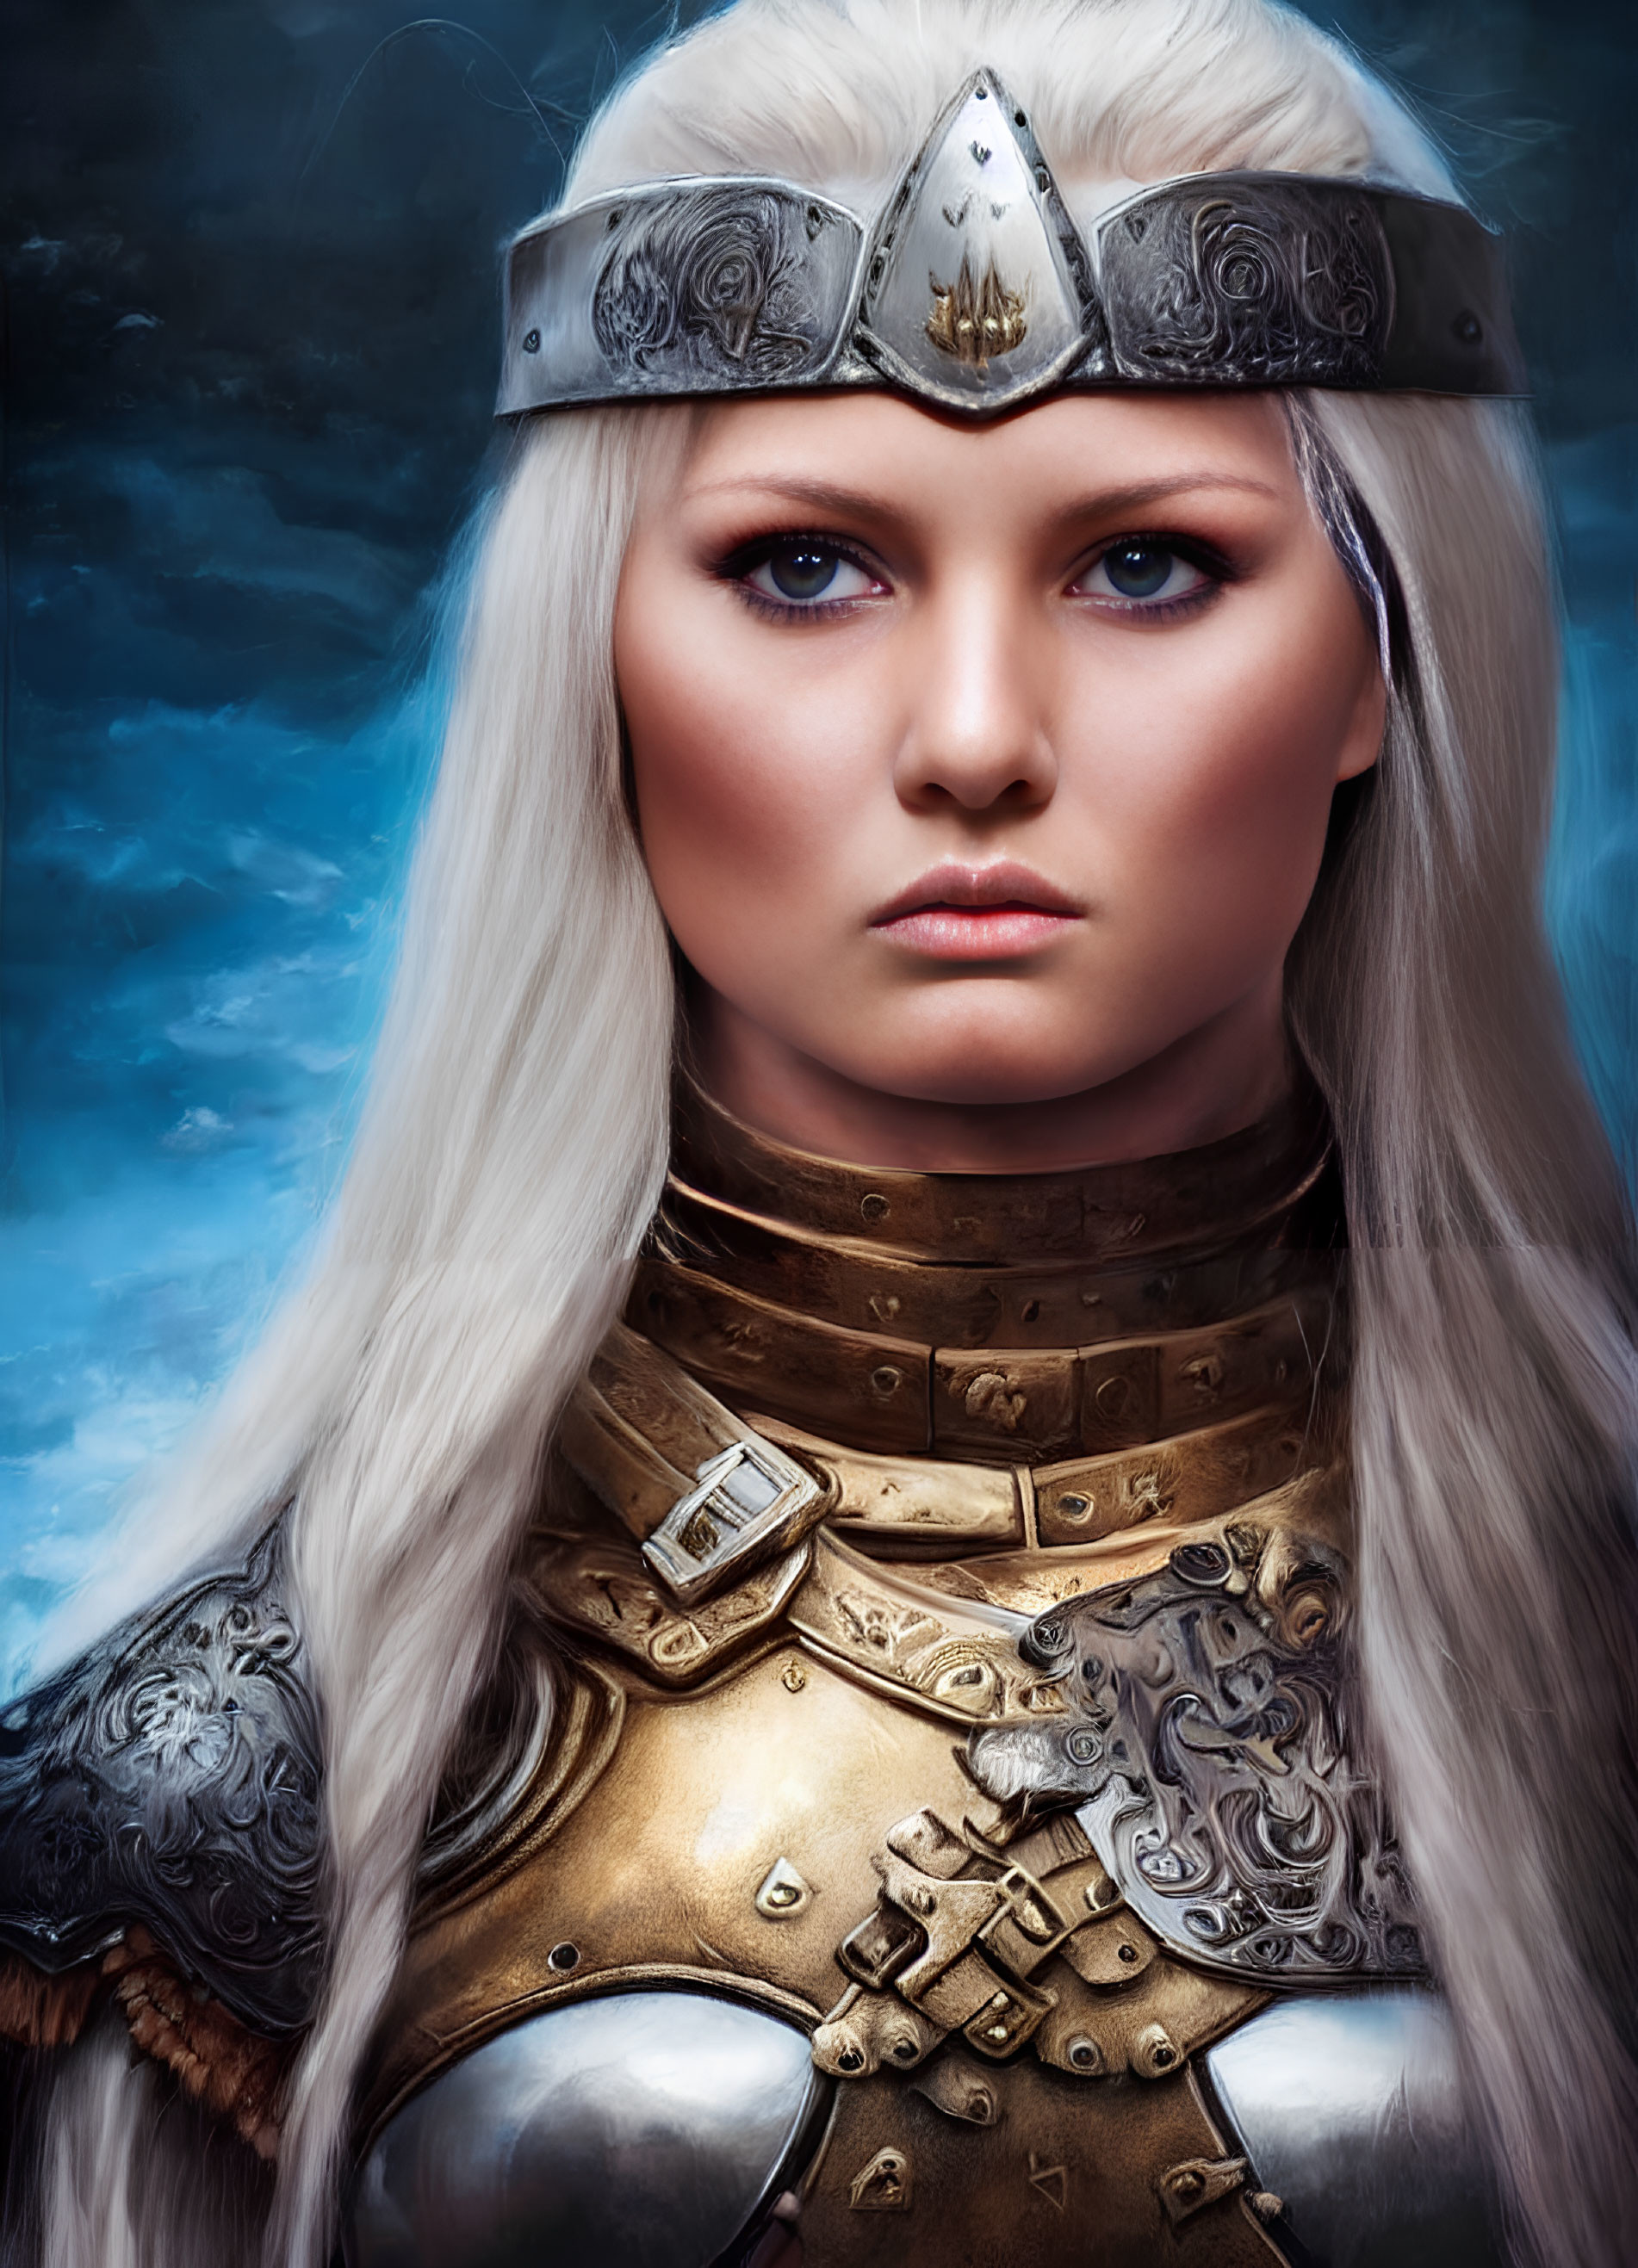 Woman with piercing blue eyes, white hair, metal crown, and medieval armor